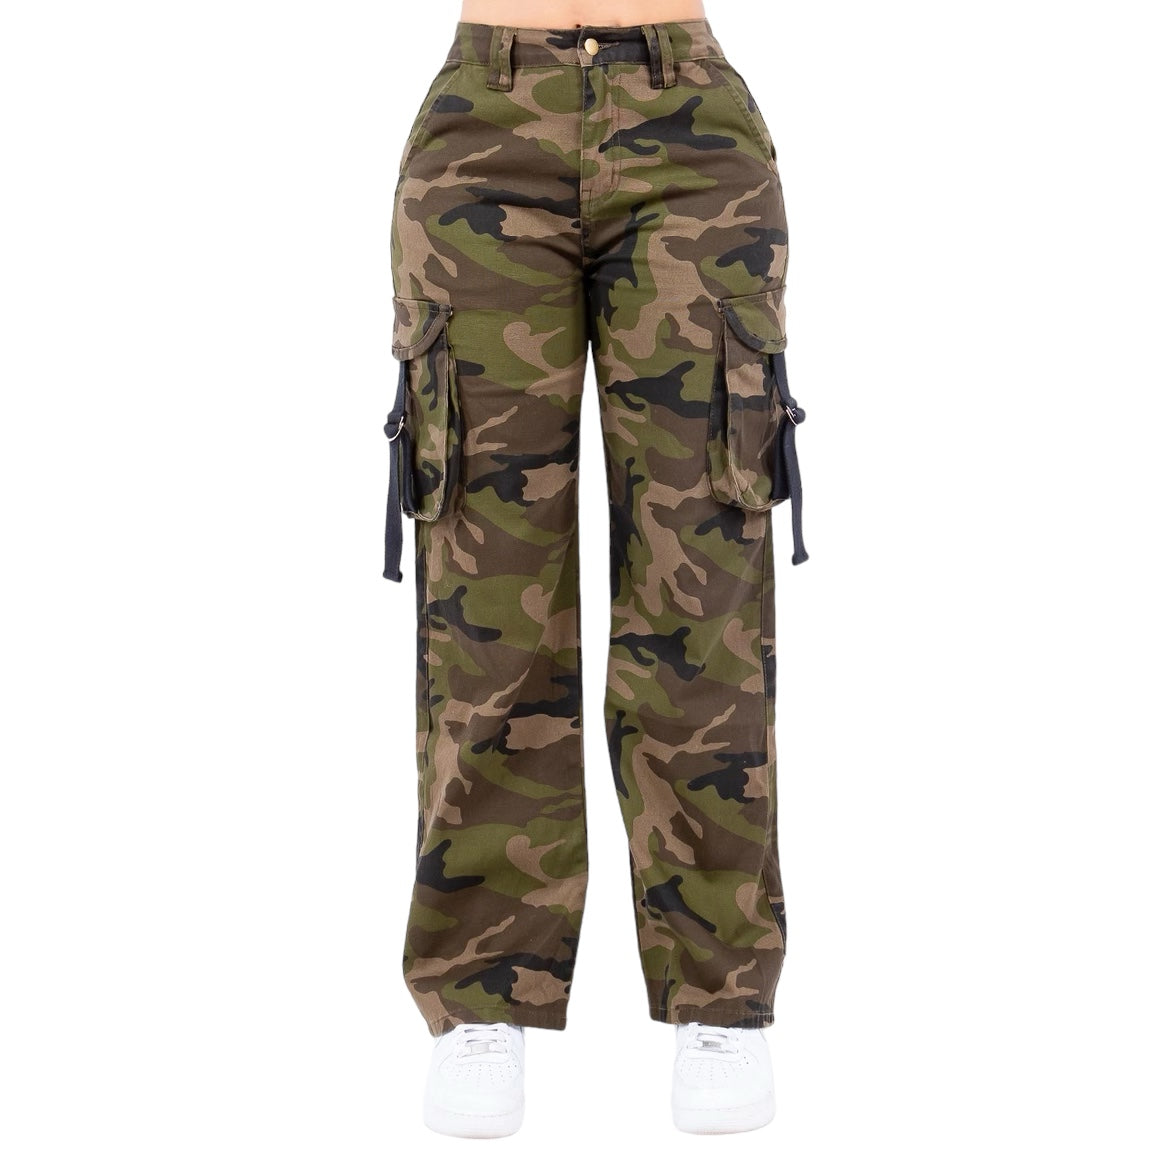 Harajuku Hip Hop Womens Cargo Pants With Army Print And High Waist For  Casual Combat And Camouflage Camouflage Trousers Women From Blueberry11,  $15.86 | DHgate.Com